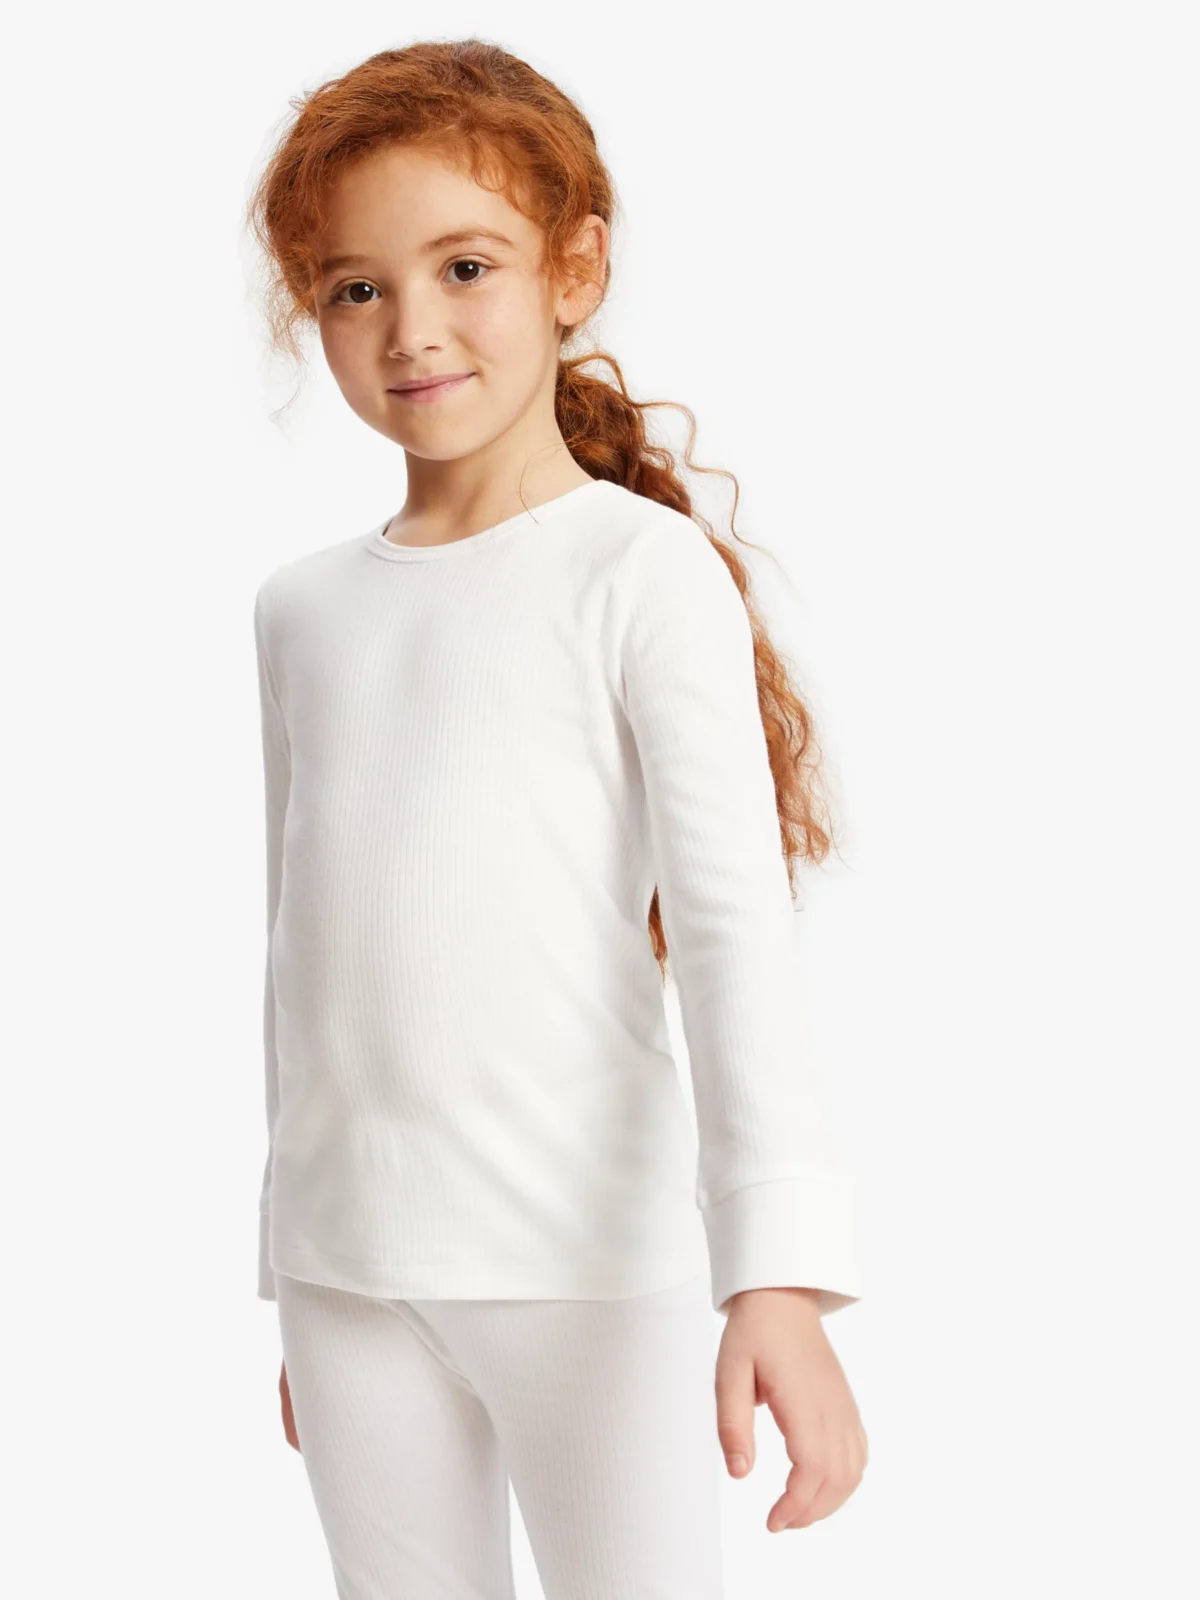 thermal wear for kids